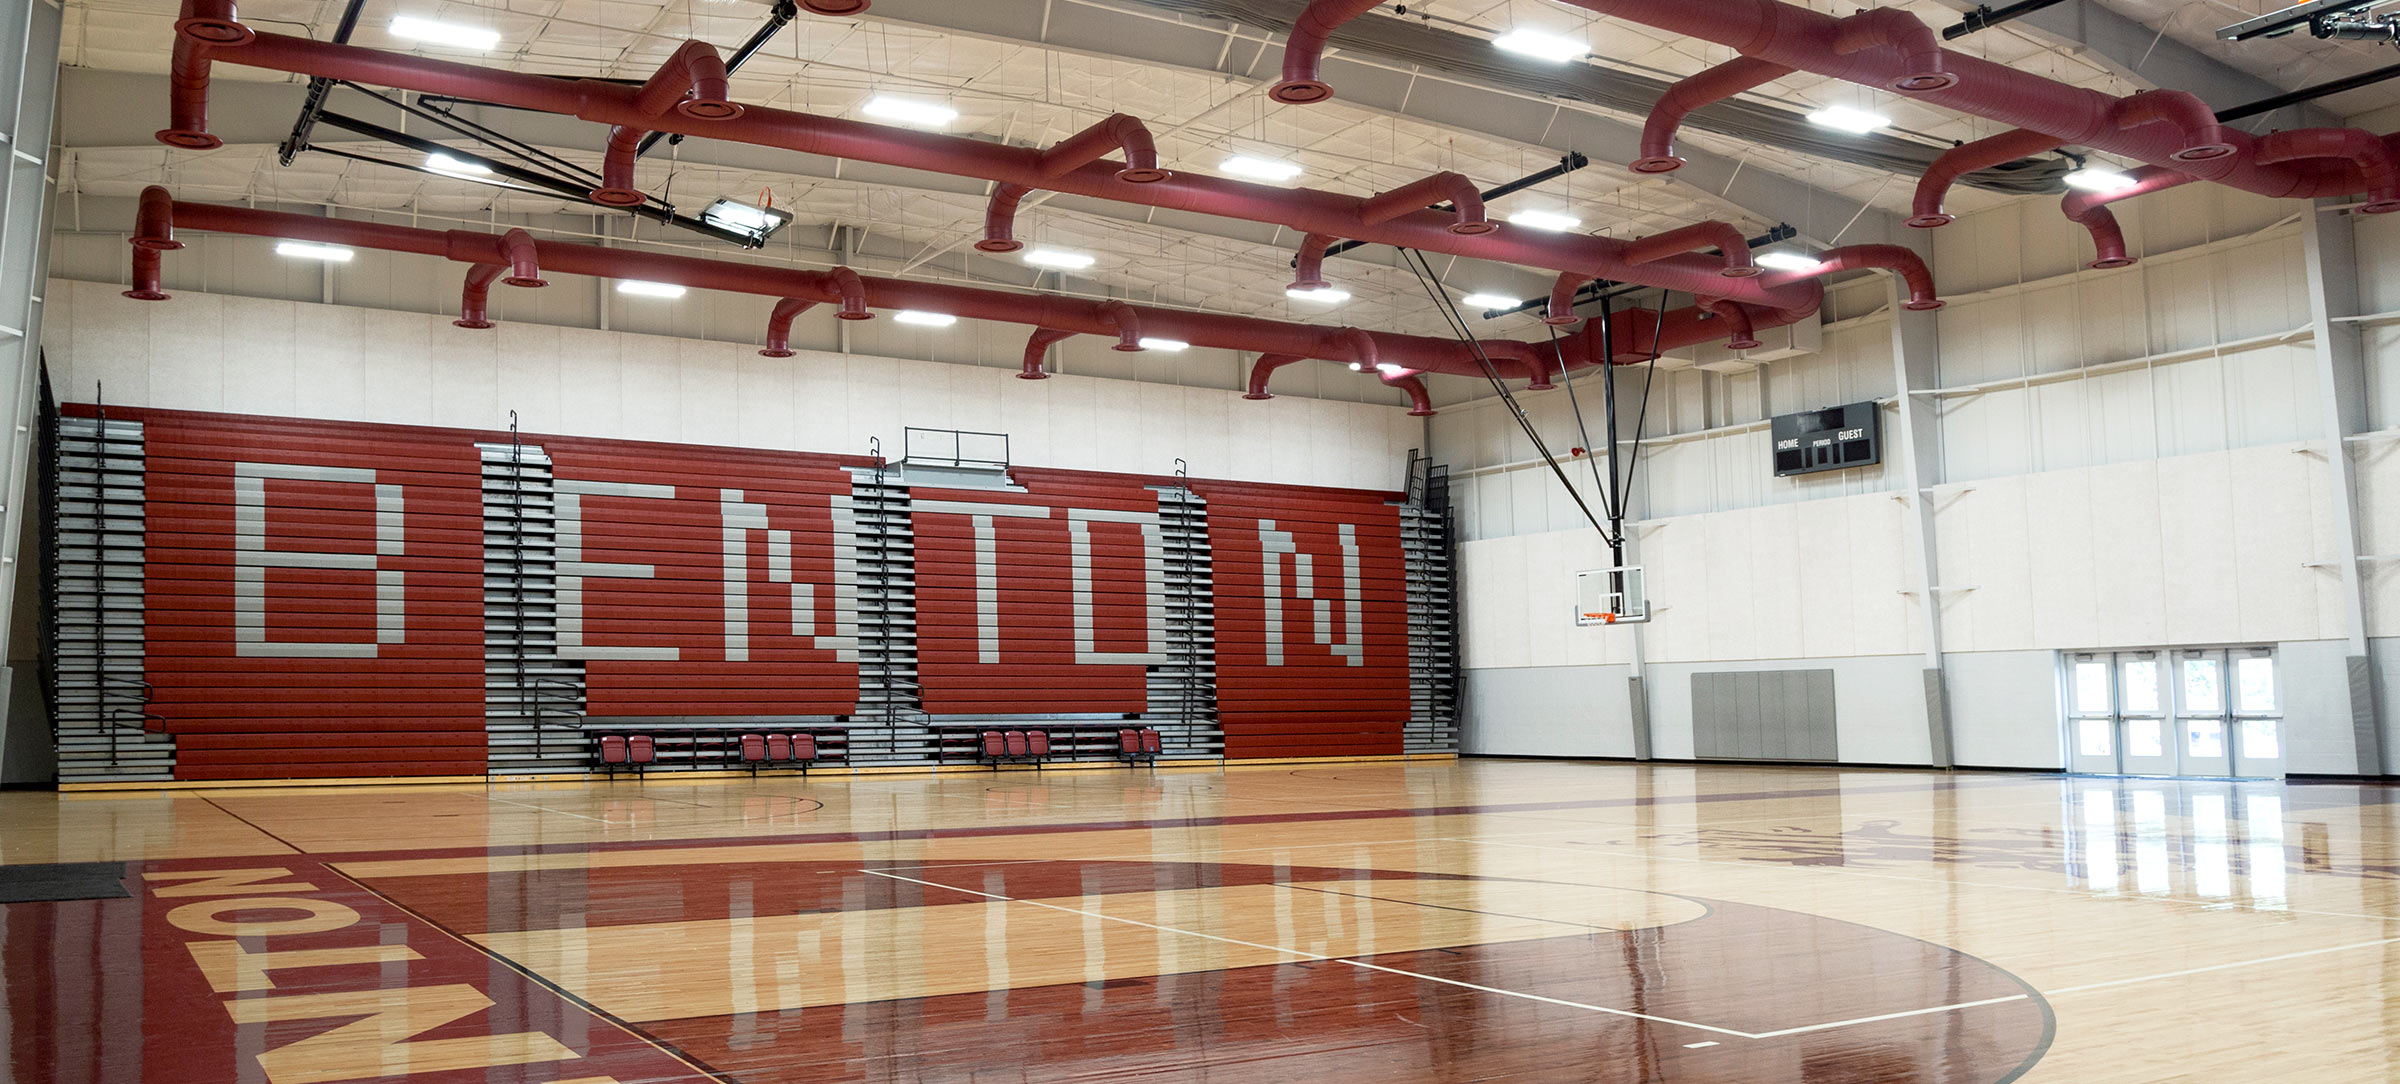 Benton CCSD 47 Athletic and Performance Complex by BHDG Architecture, Photography by Haley Powell